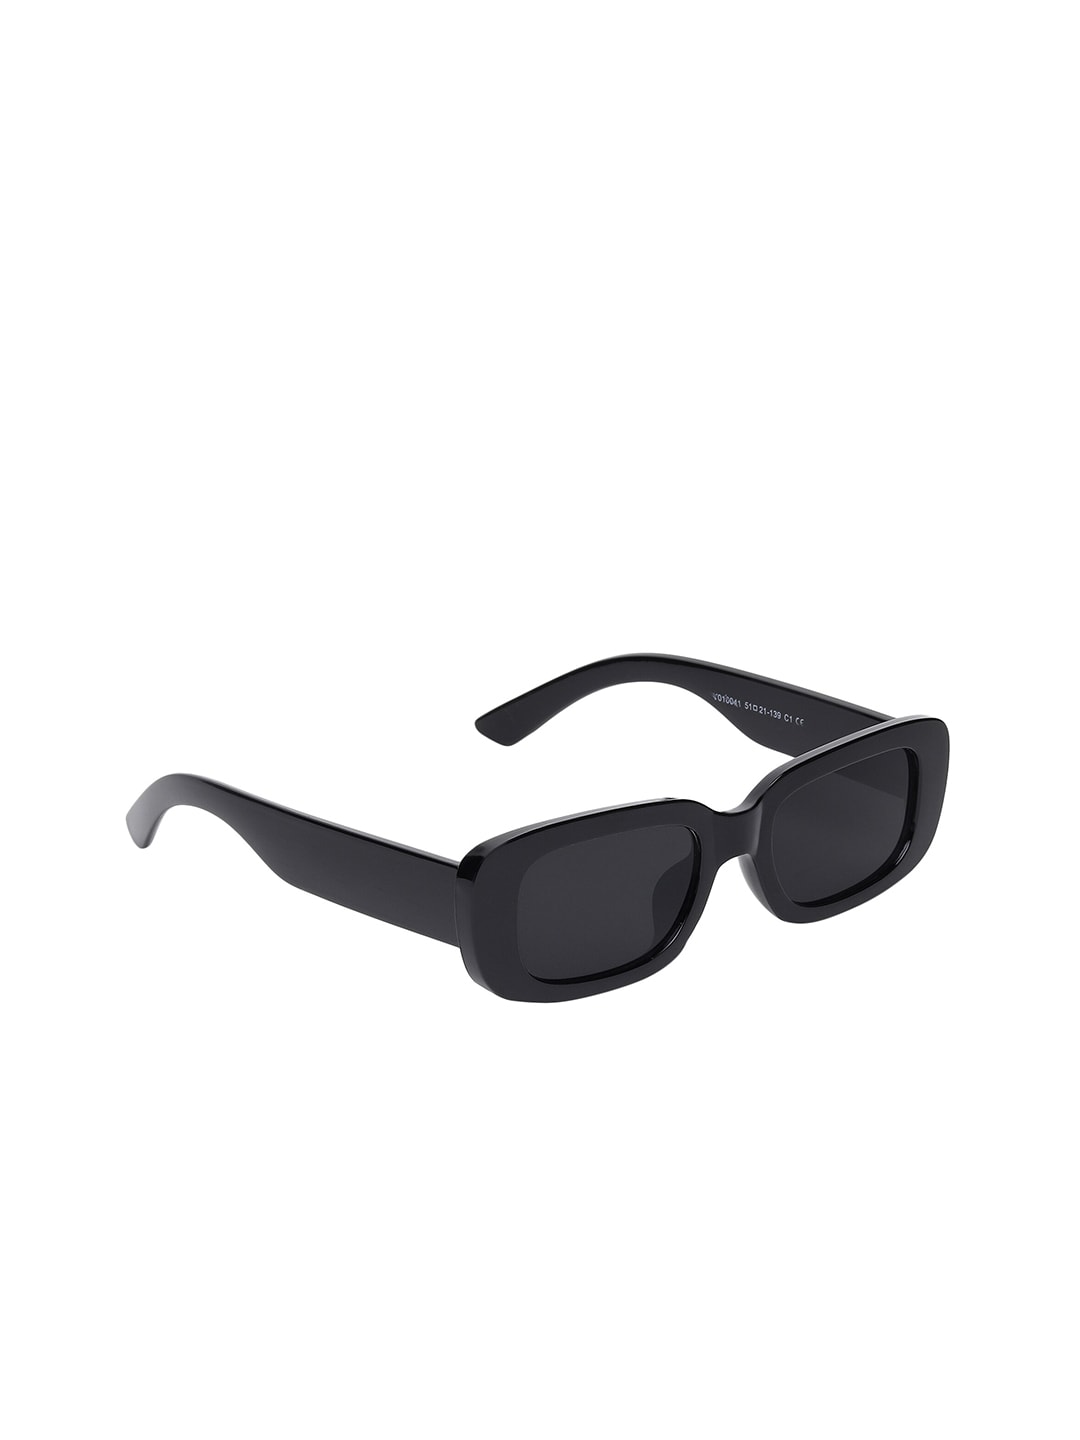 CRIBA Unisex Black Lens & Black Rectangle Sunglasses with UV Protected Lens CR_CANDY 260 Price in India